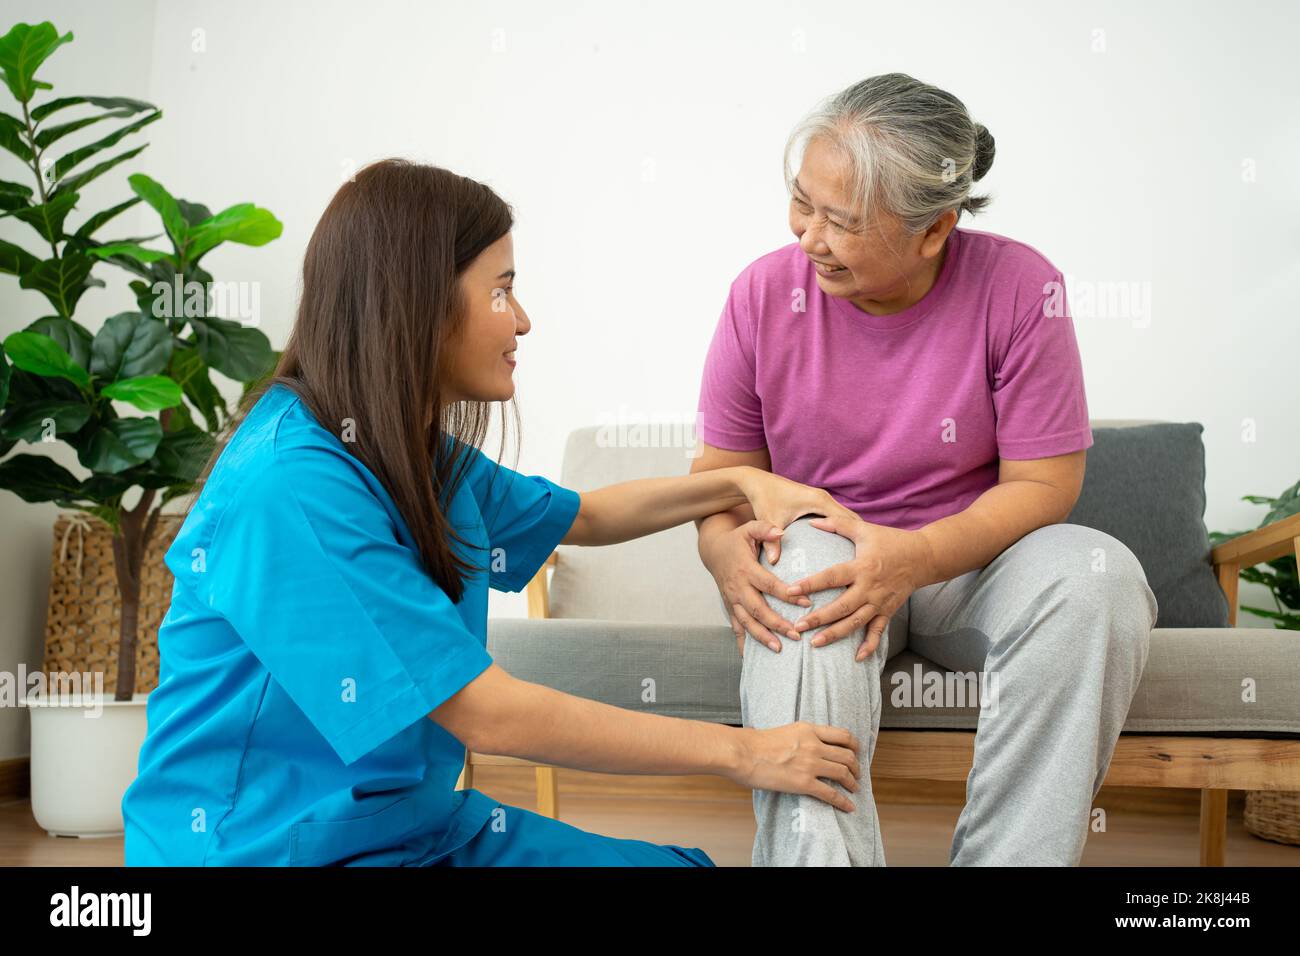 physiotherapist doctor or caregiver helping senior older woman stretching his hamstring and doing thigh or leg rehabilitation in exercise room, Osteoa Stock Photo